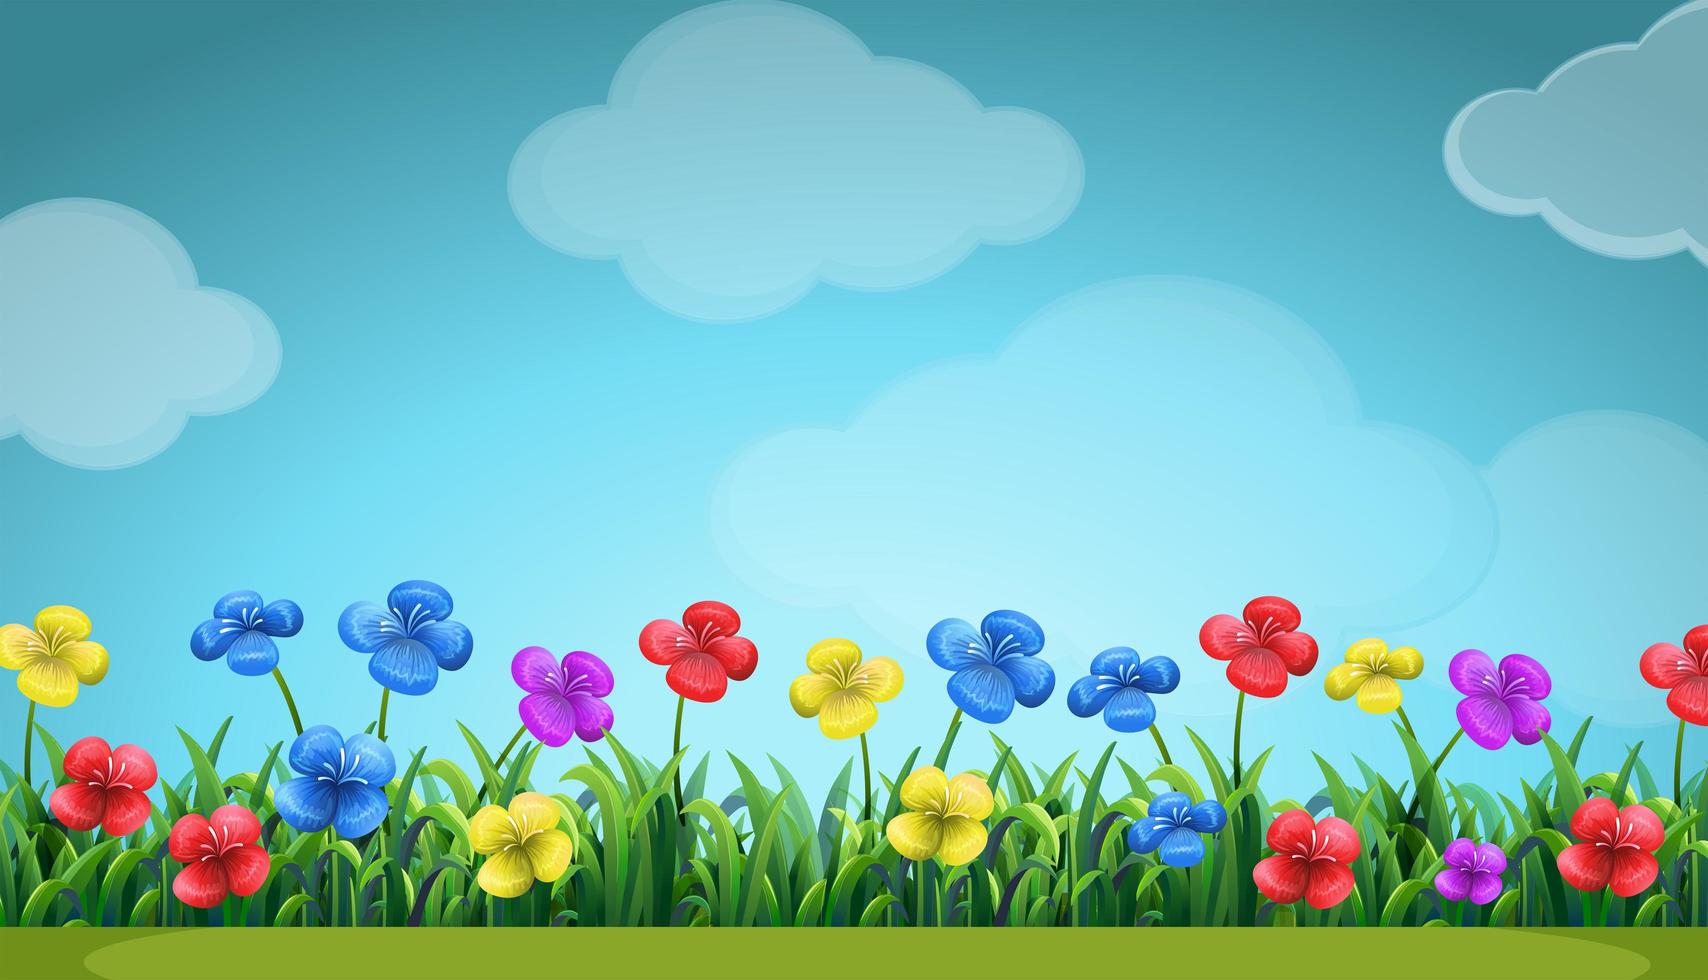 Flowers in the field vector